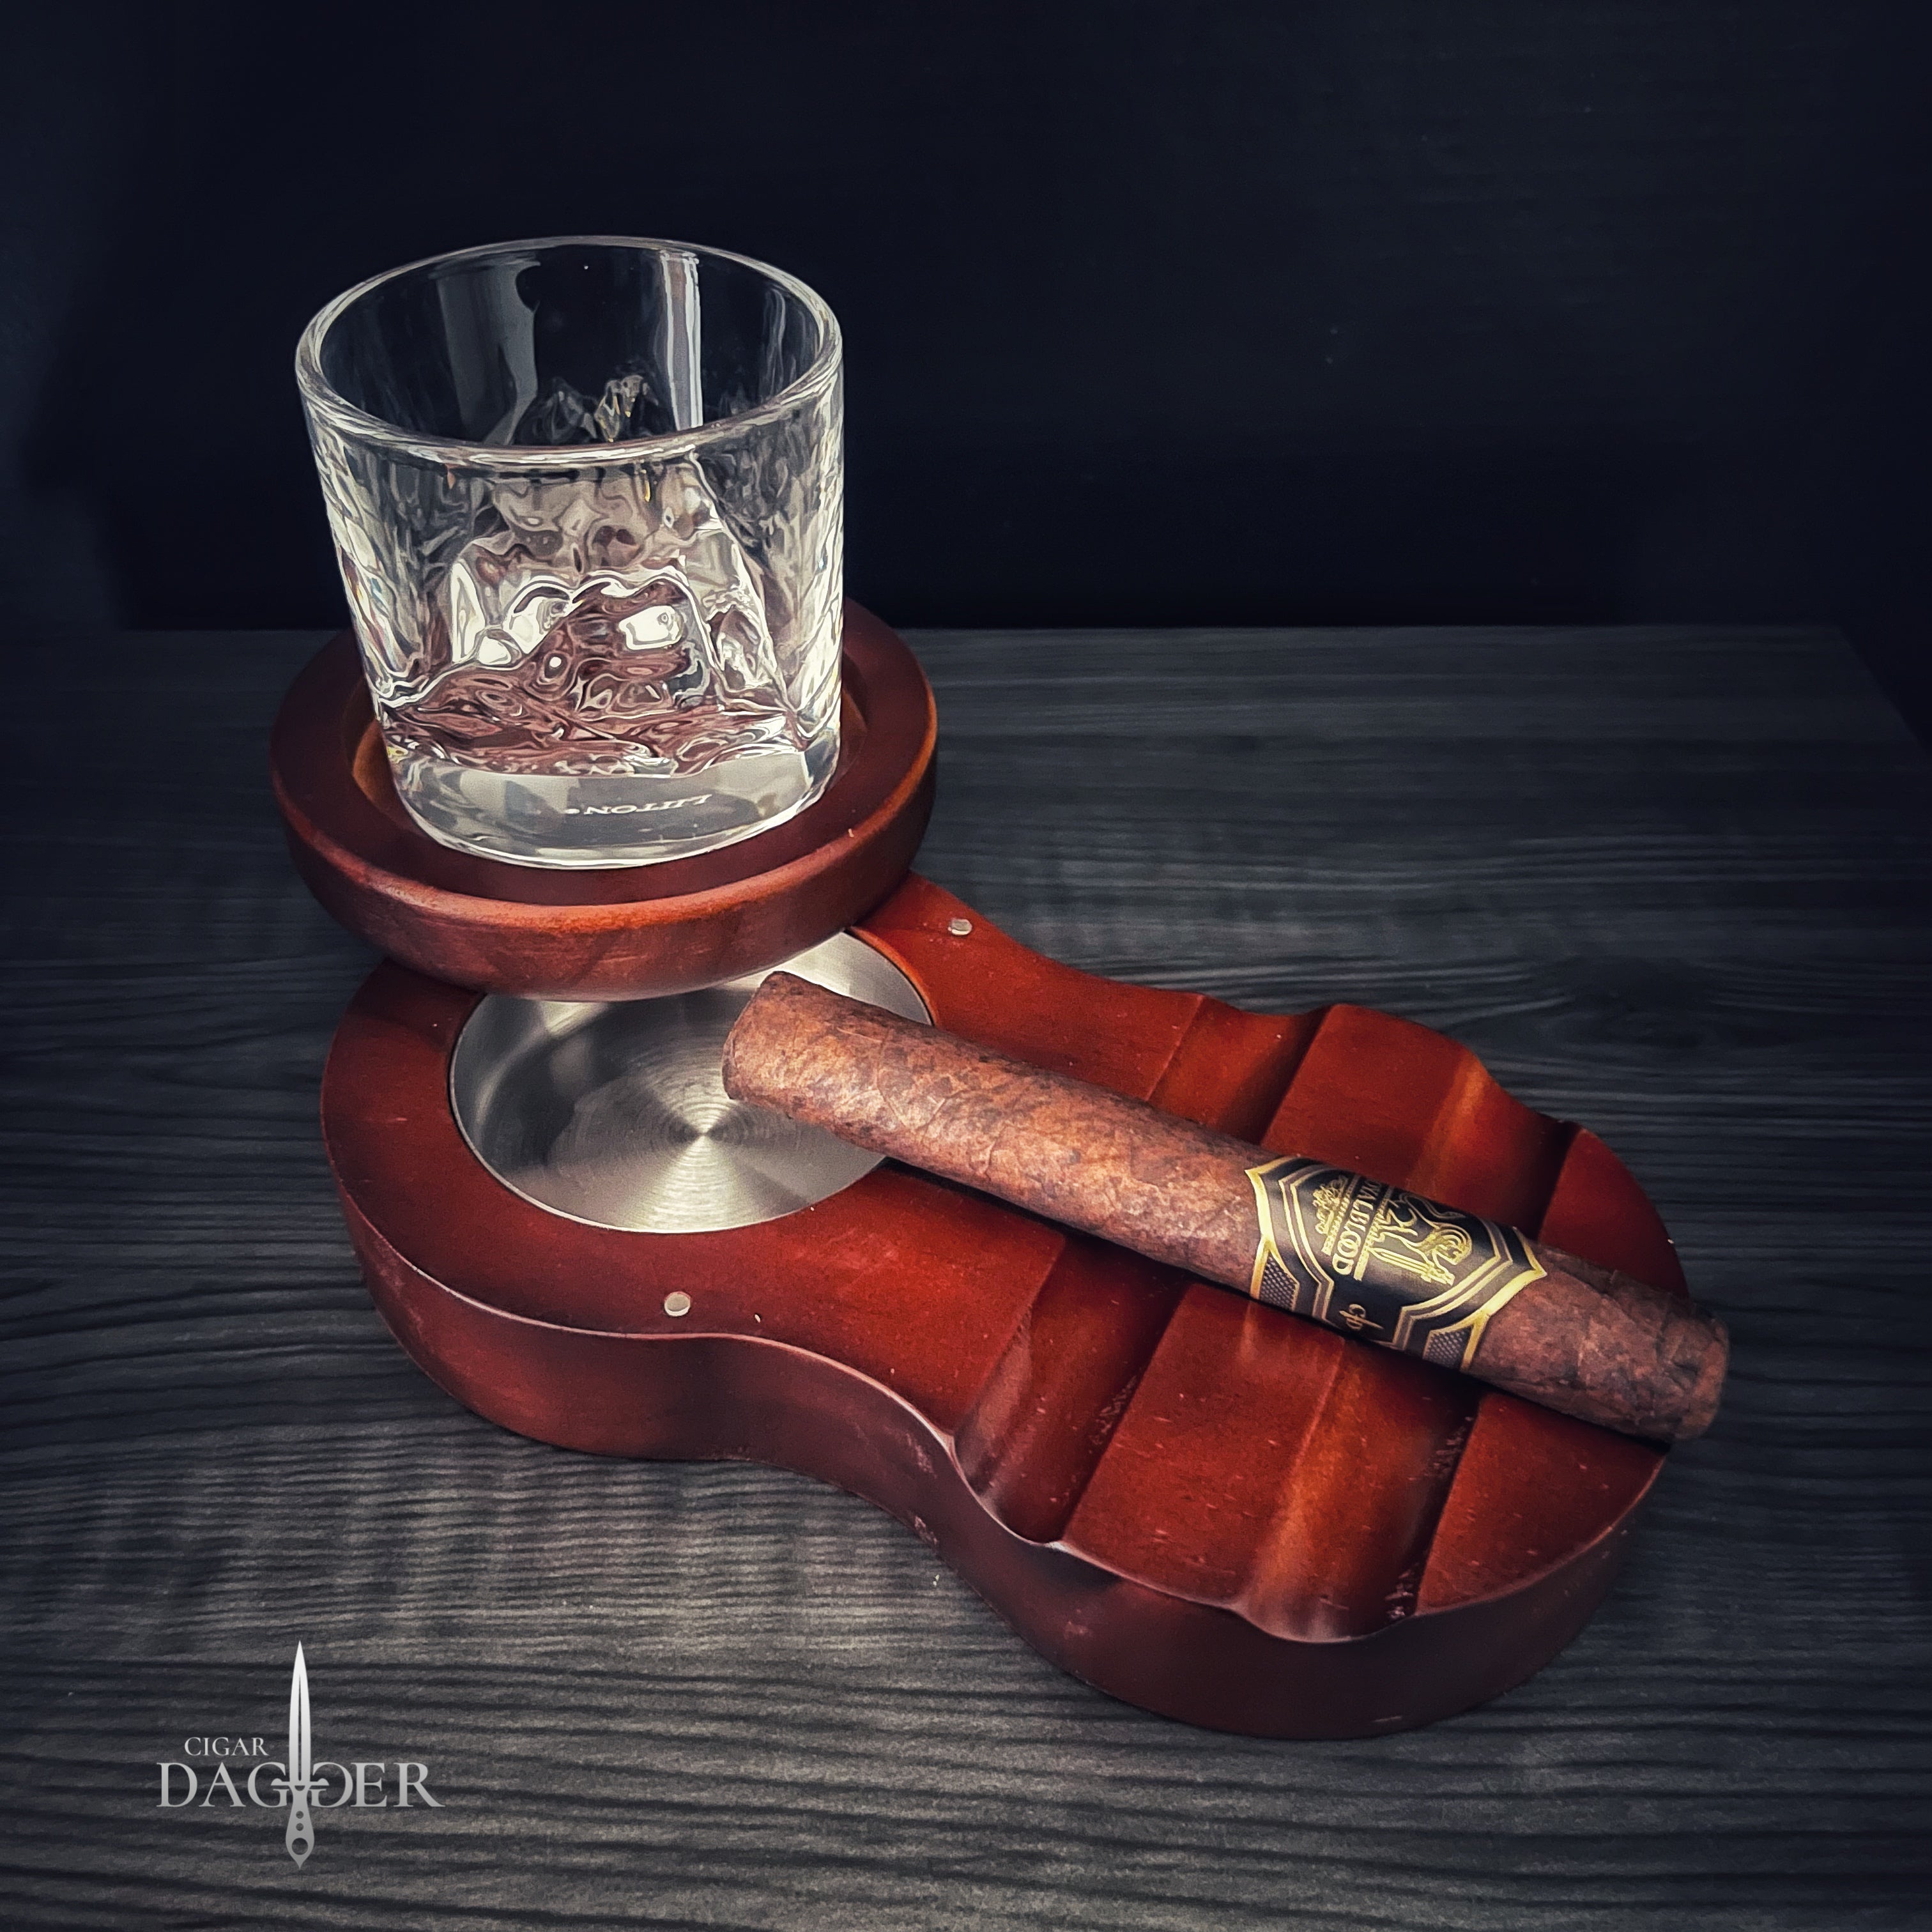 Walnut Cigar Ashtray And Whiskey Coaster • The Gentleman's Flavor